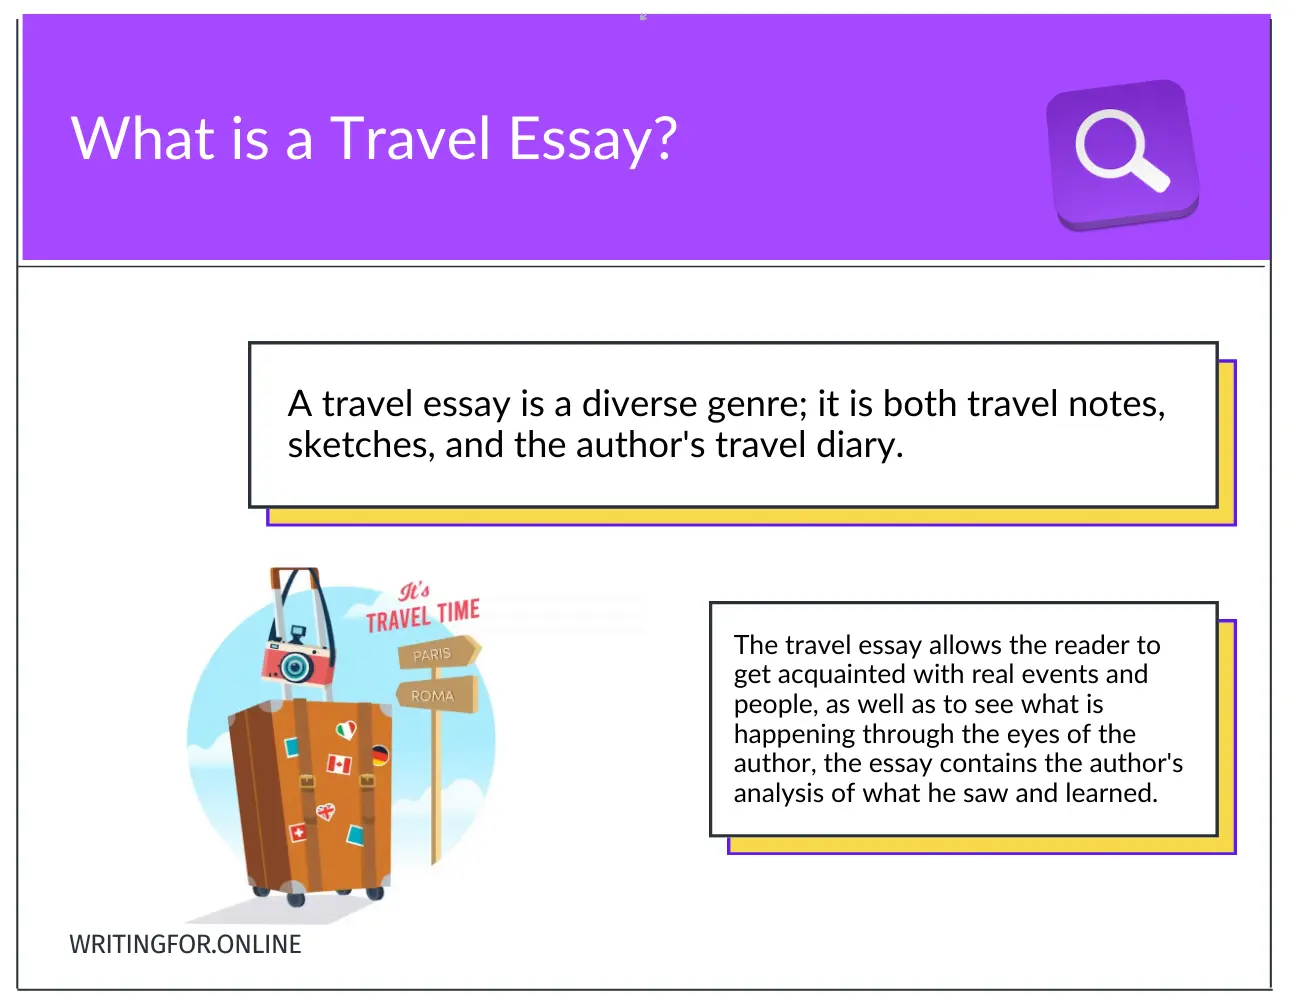 travel essay meaning